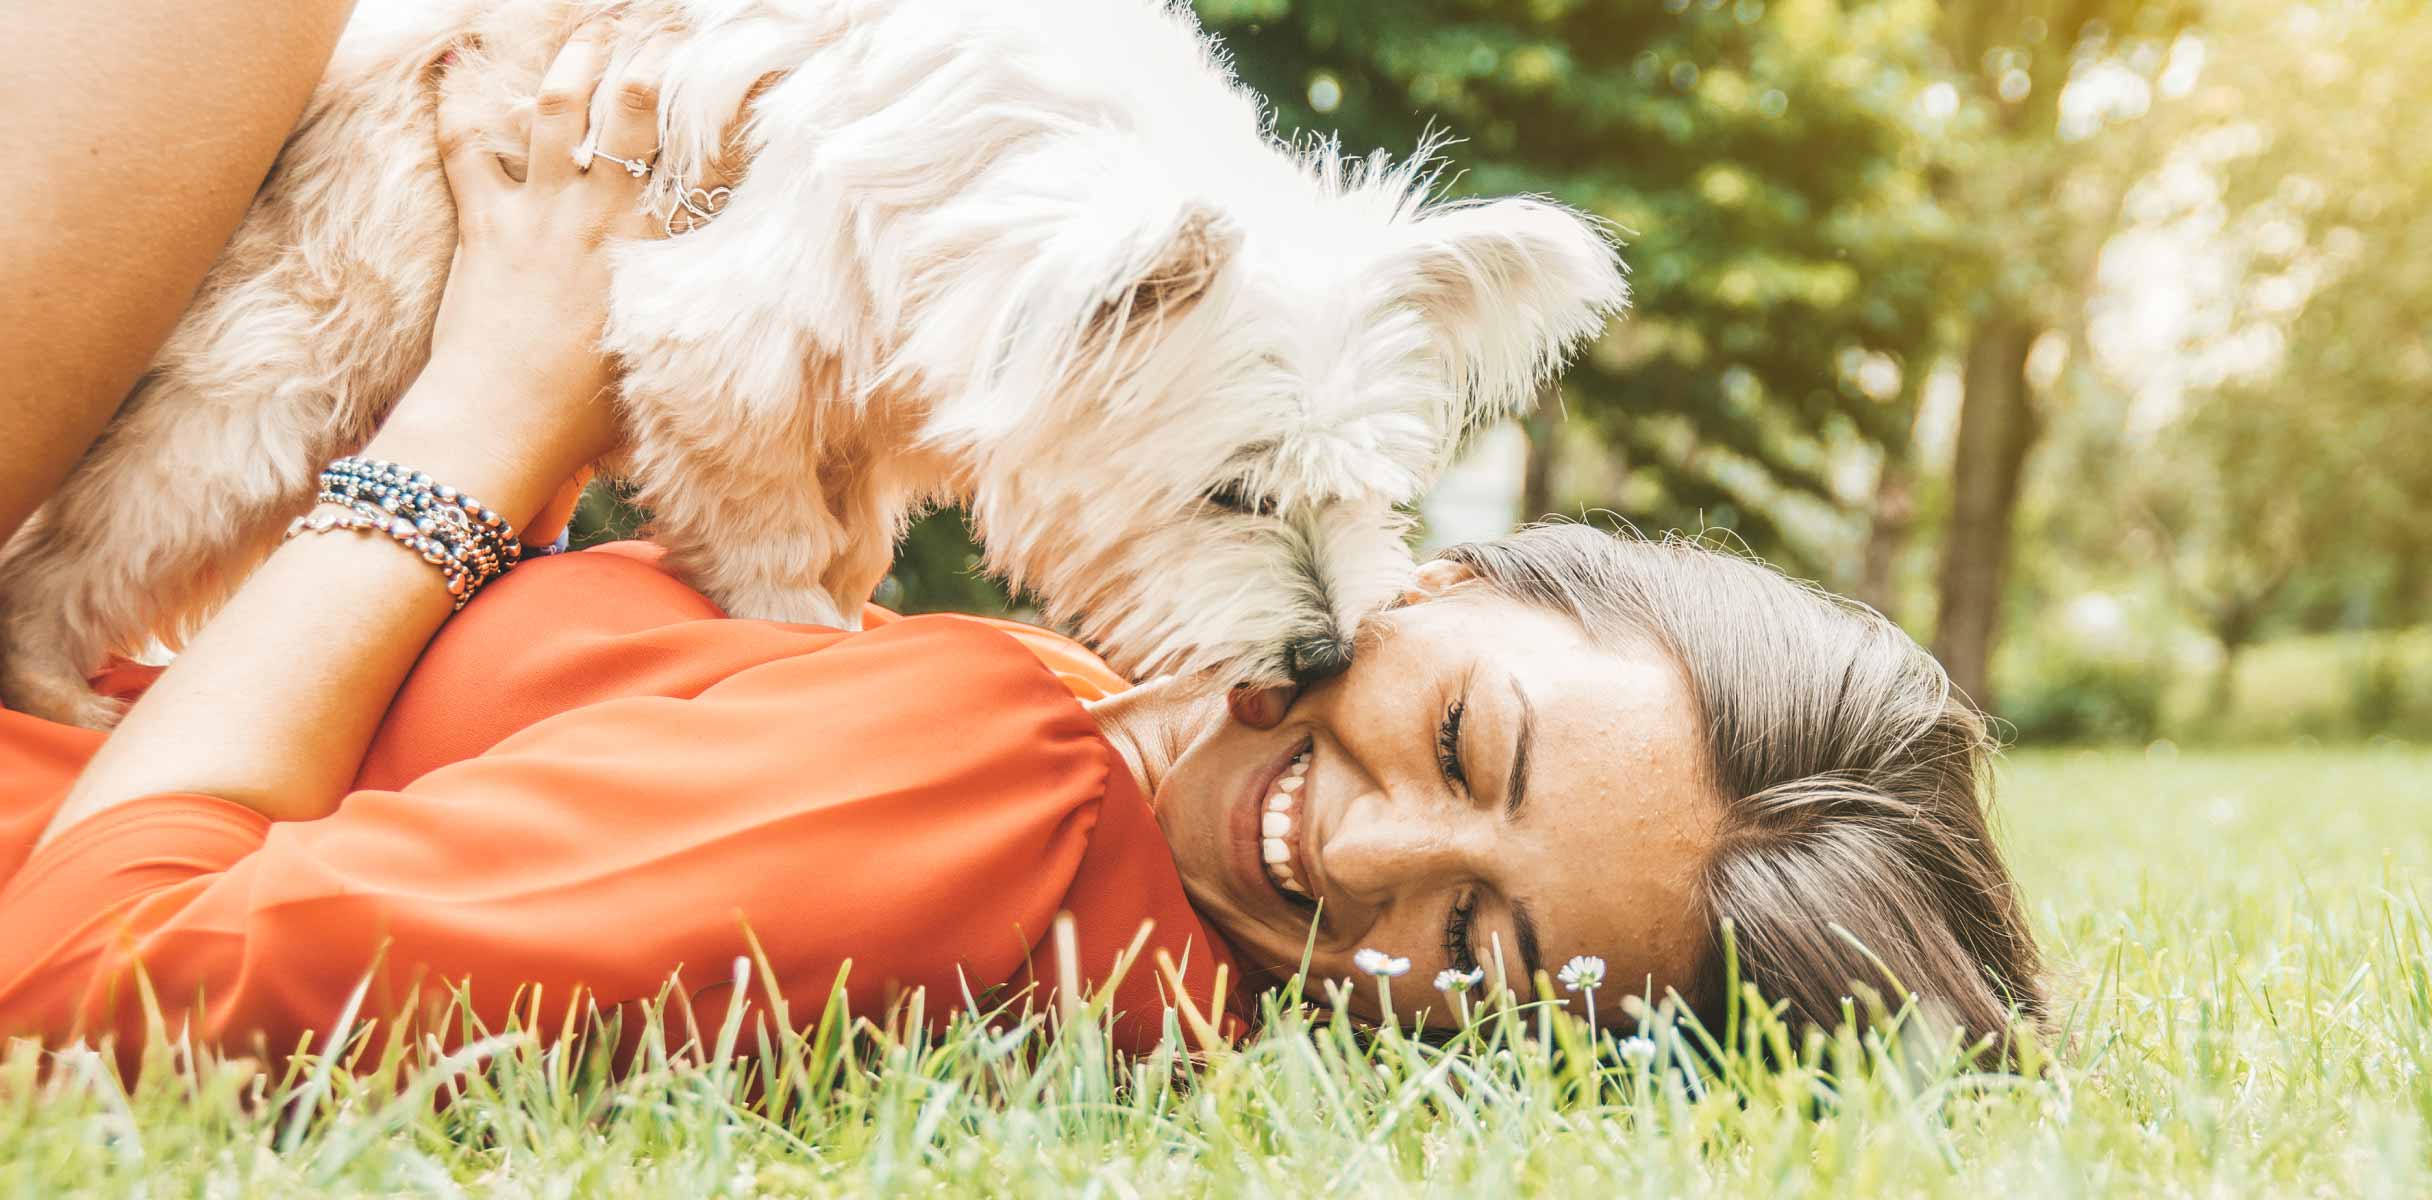 Woman cuddling with small dog on lawn